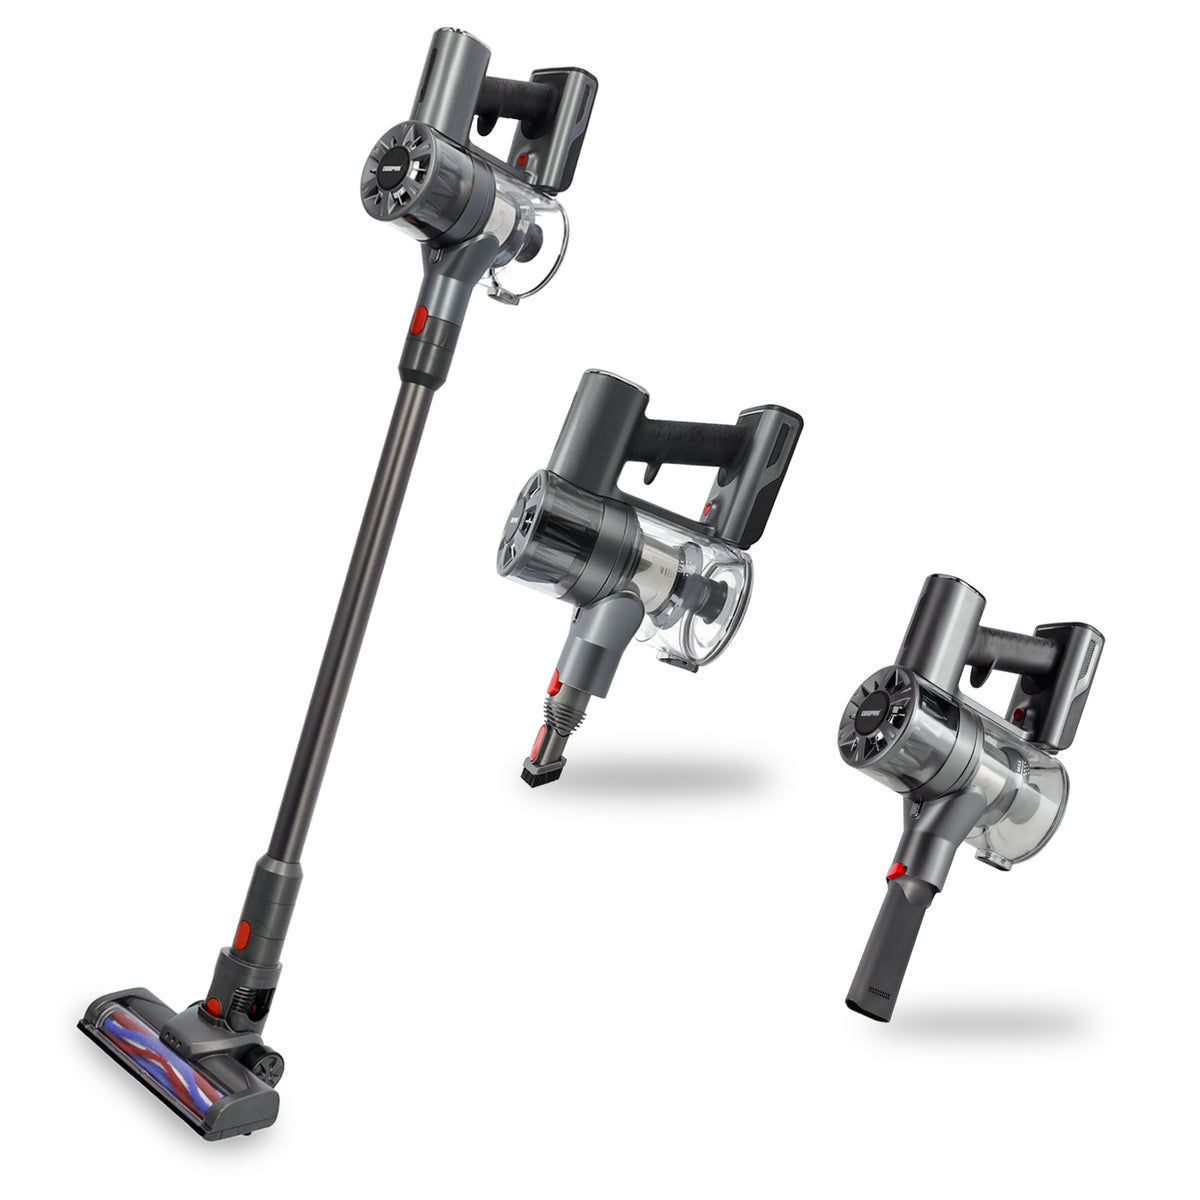 Geepas | For you. For life. Rechargeable Cordless Stick Vacuum Cleaner Vacuum Cleaner